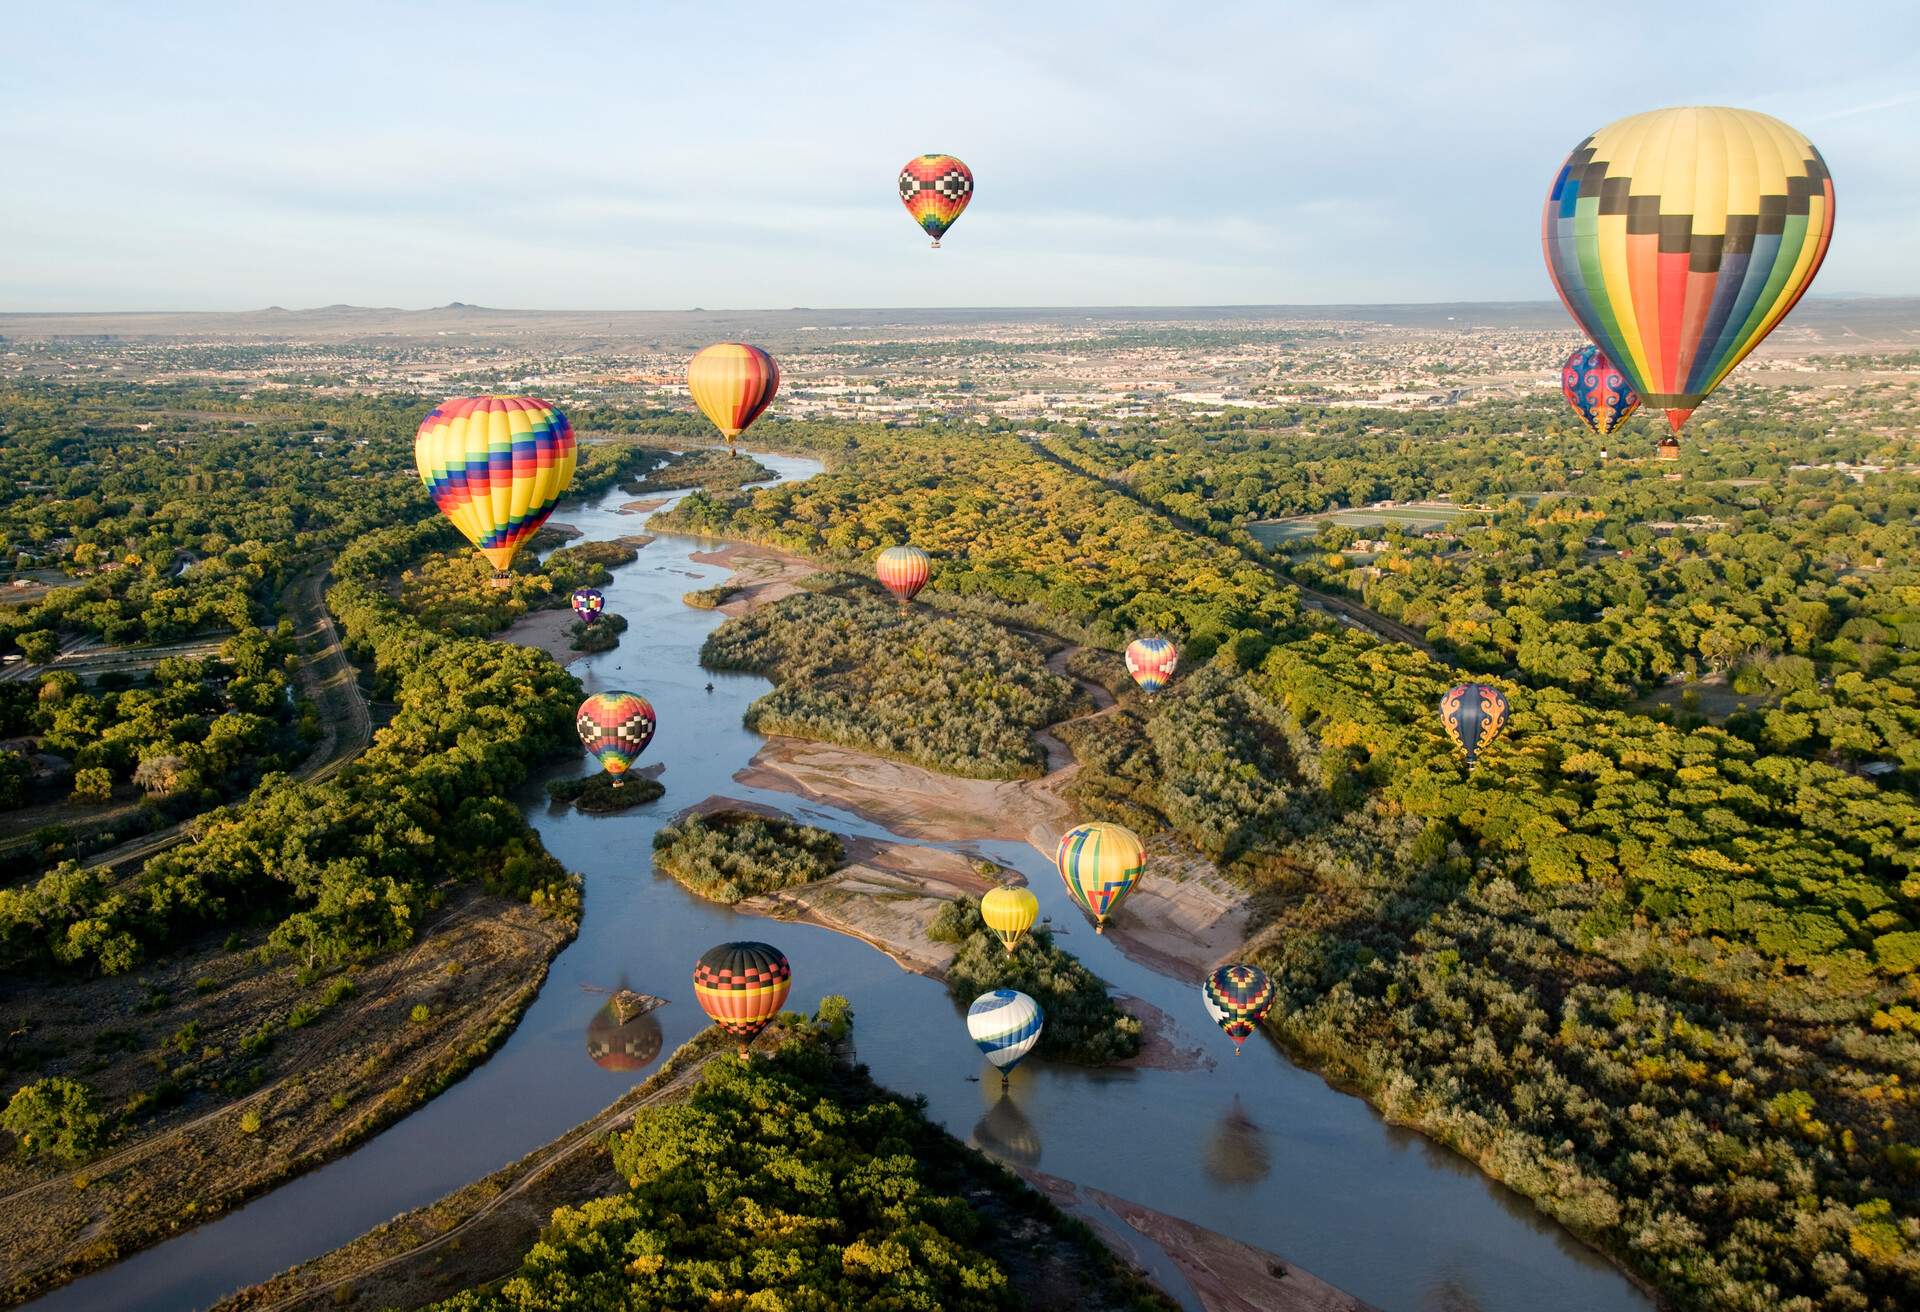 Hot air balloons flying over a meandering river surrounded by trees.